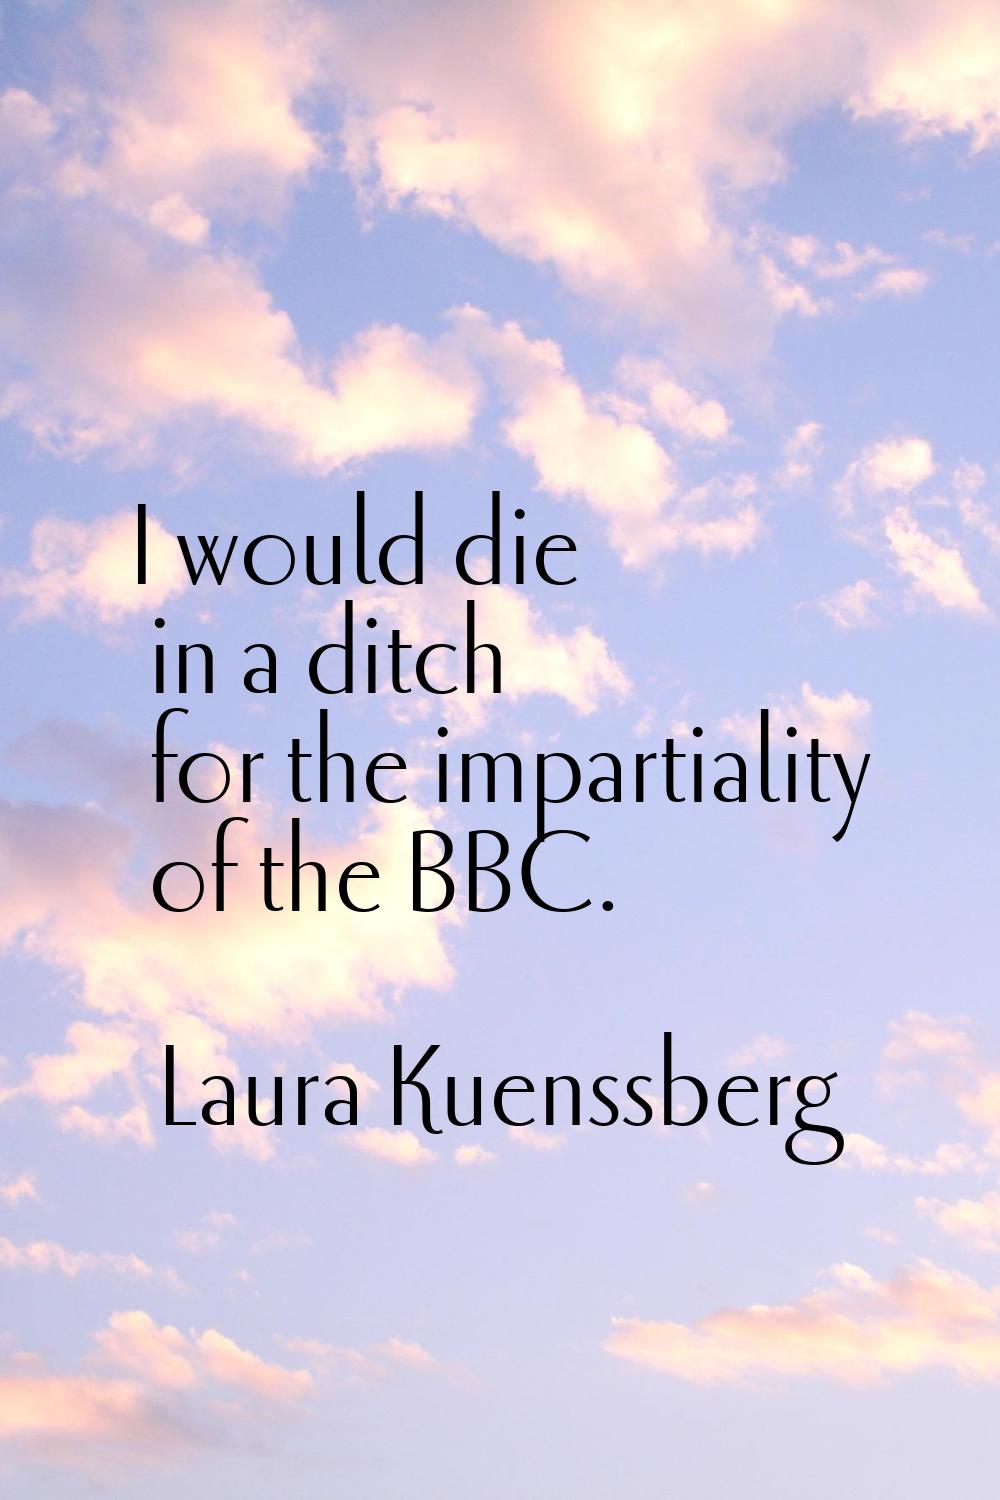 I would die in a ditch for the impartiality of the BBC.